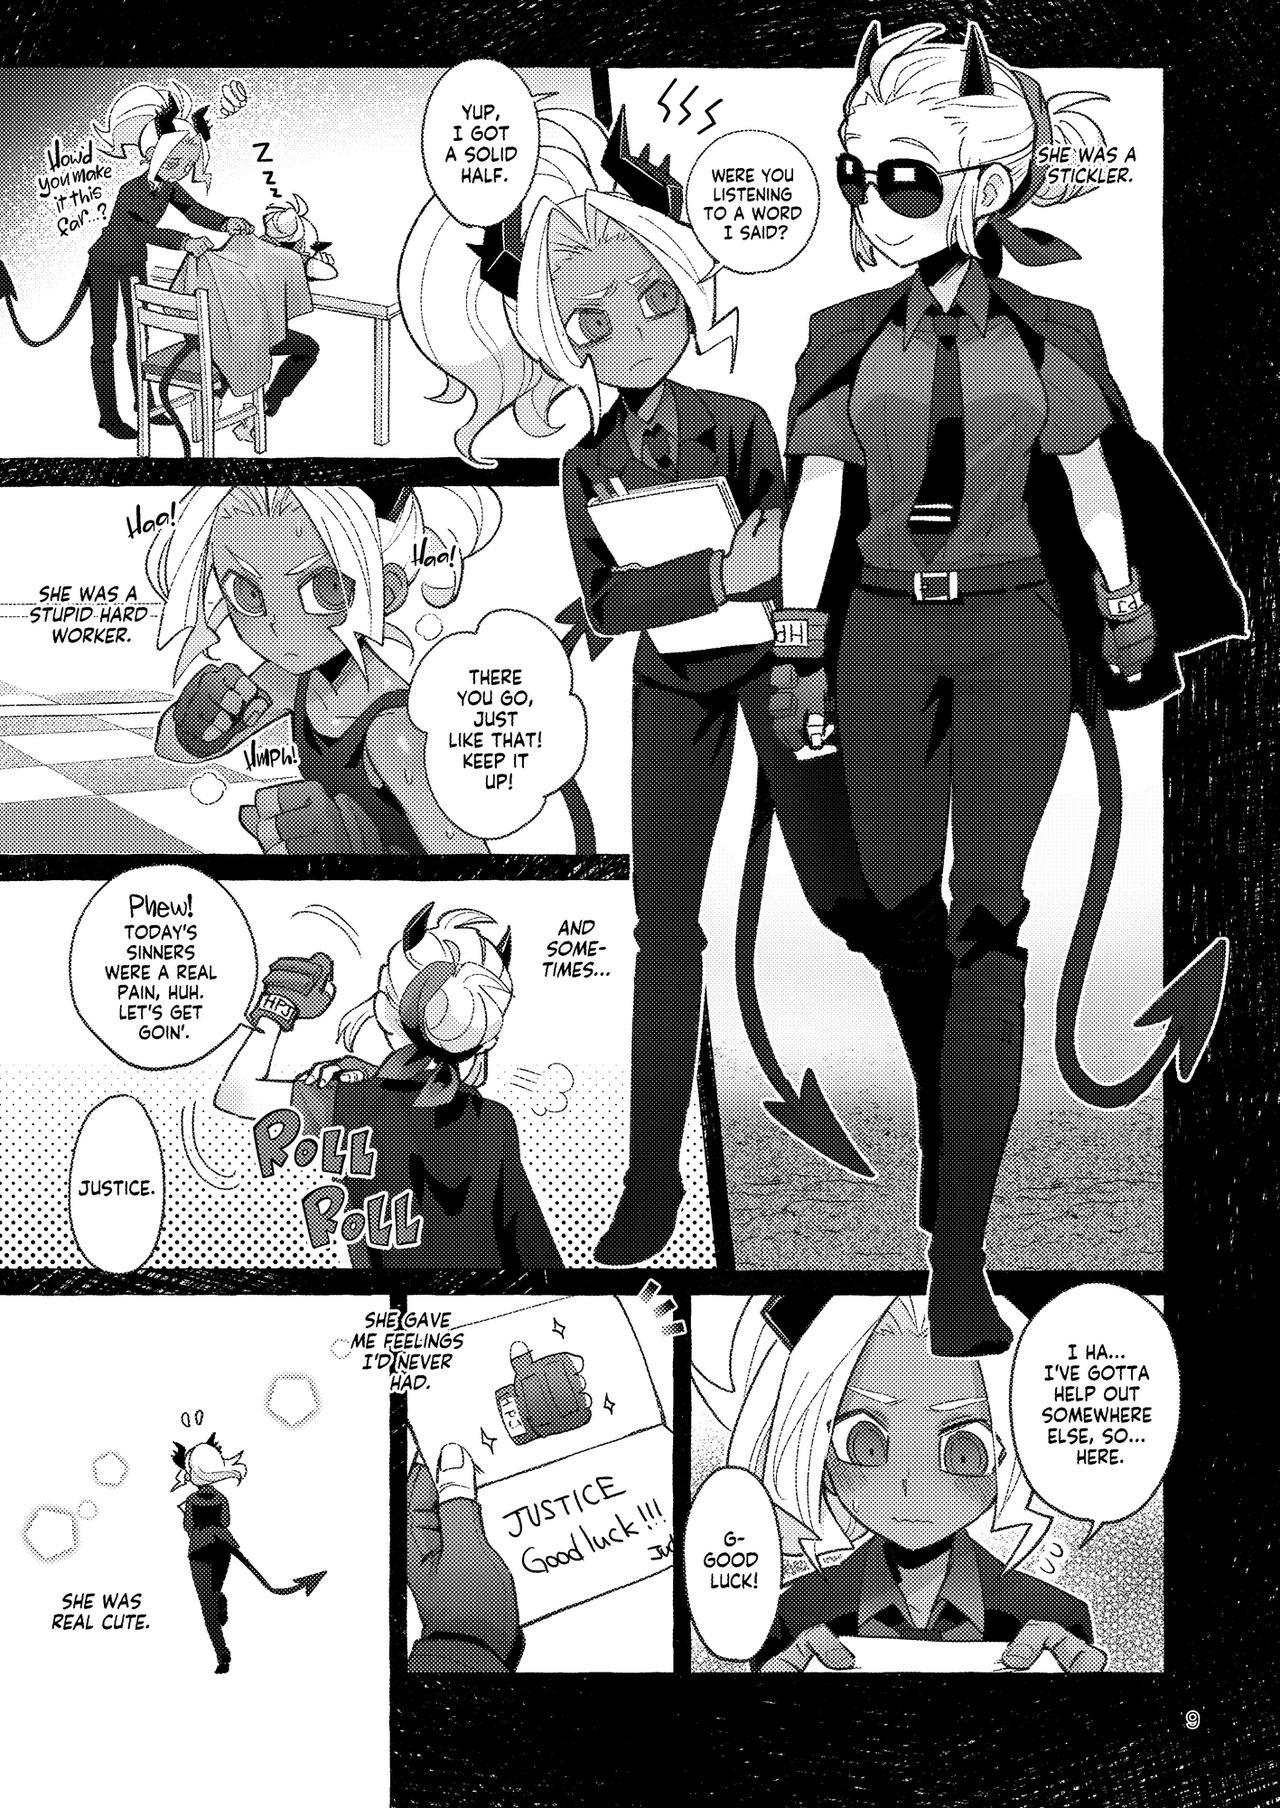 Awesome tint+℃ - Helltaker Adolescente - Page 8